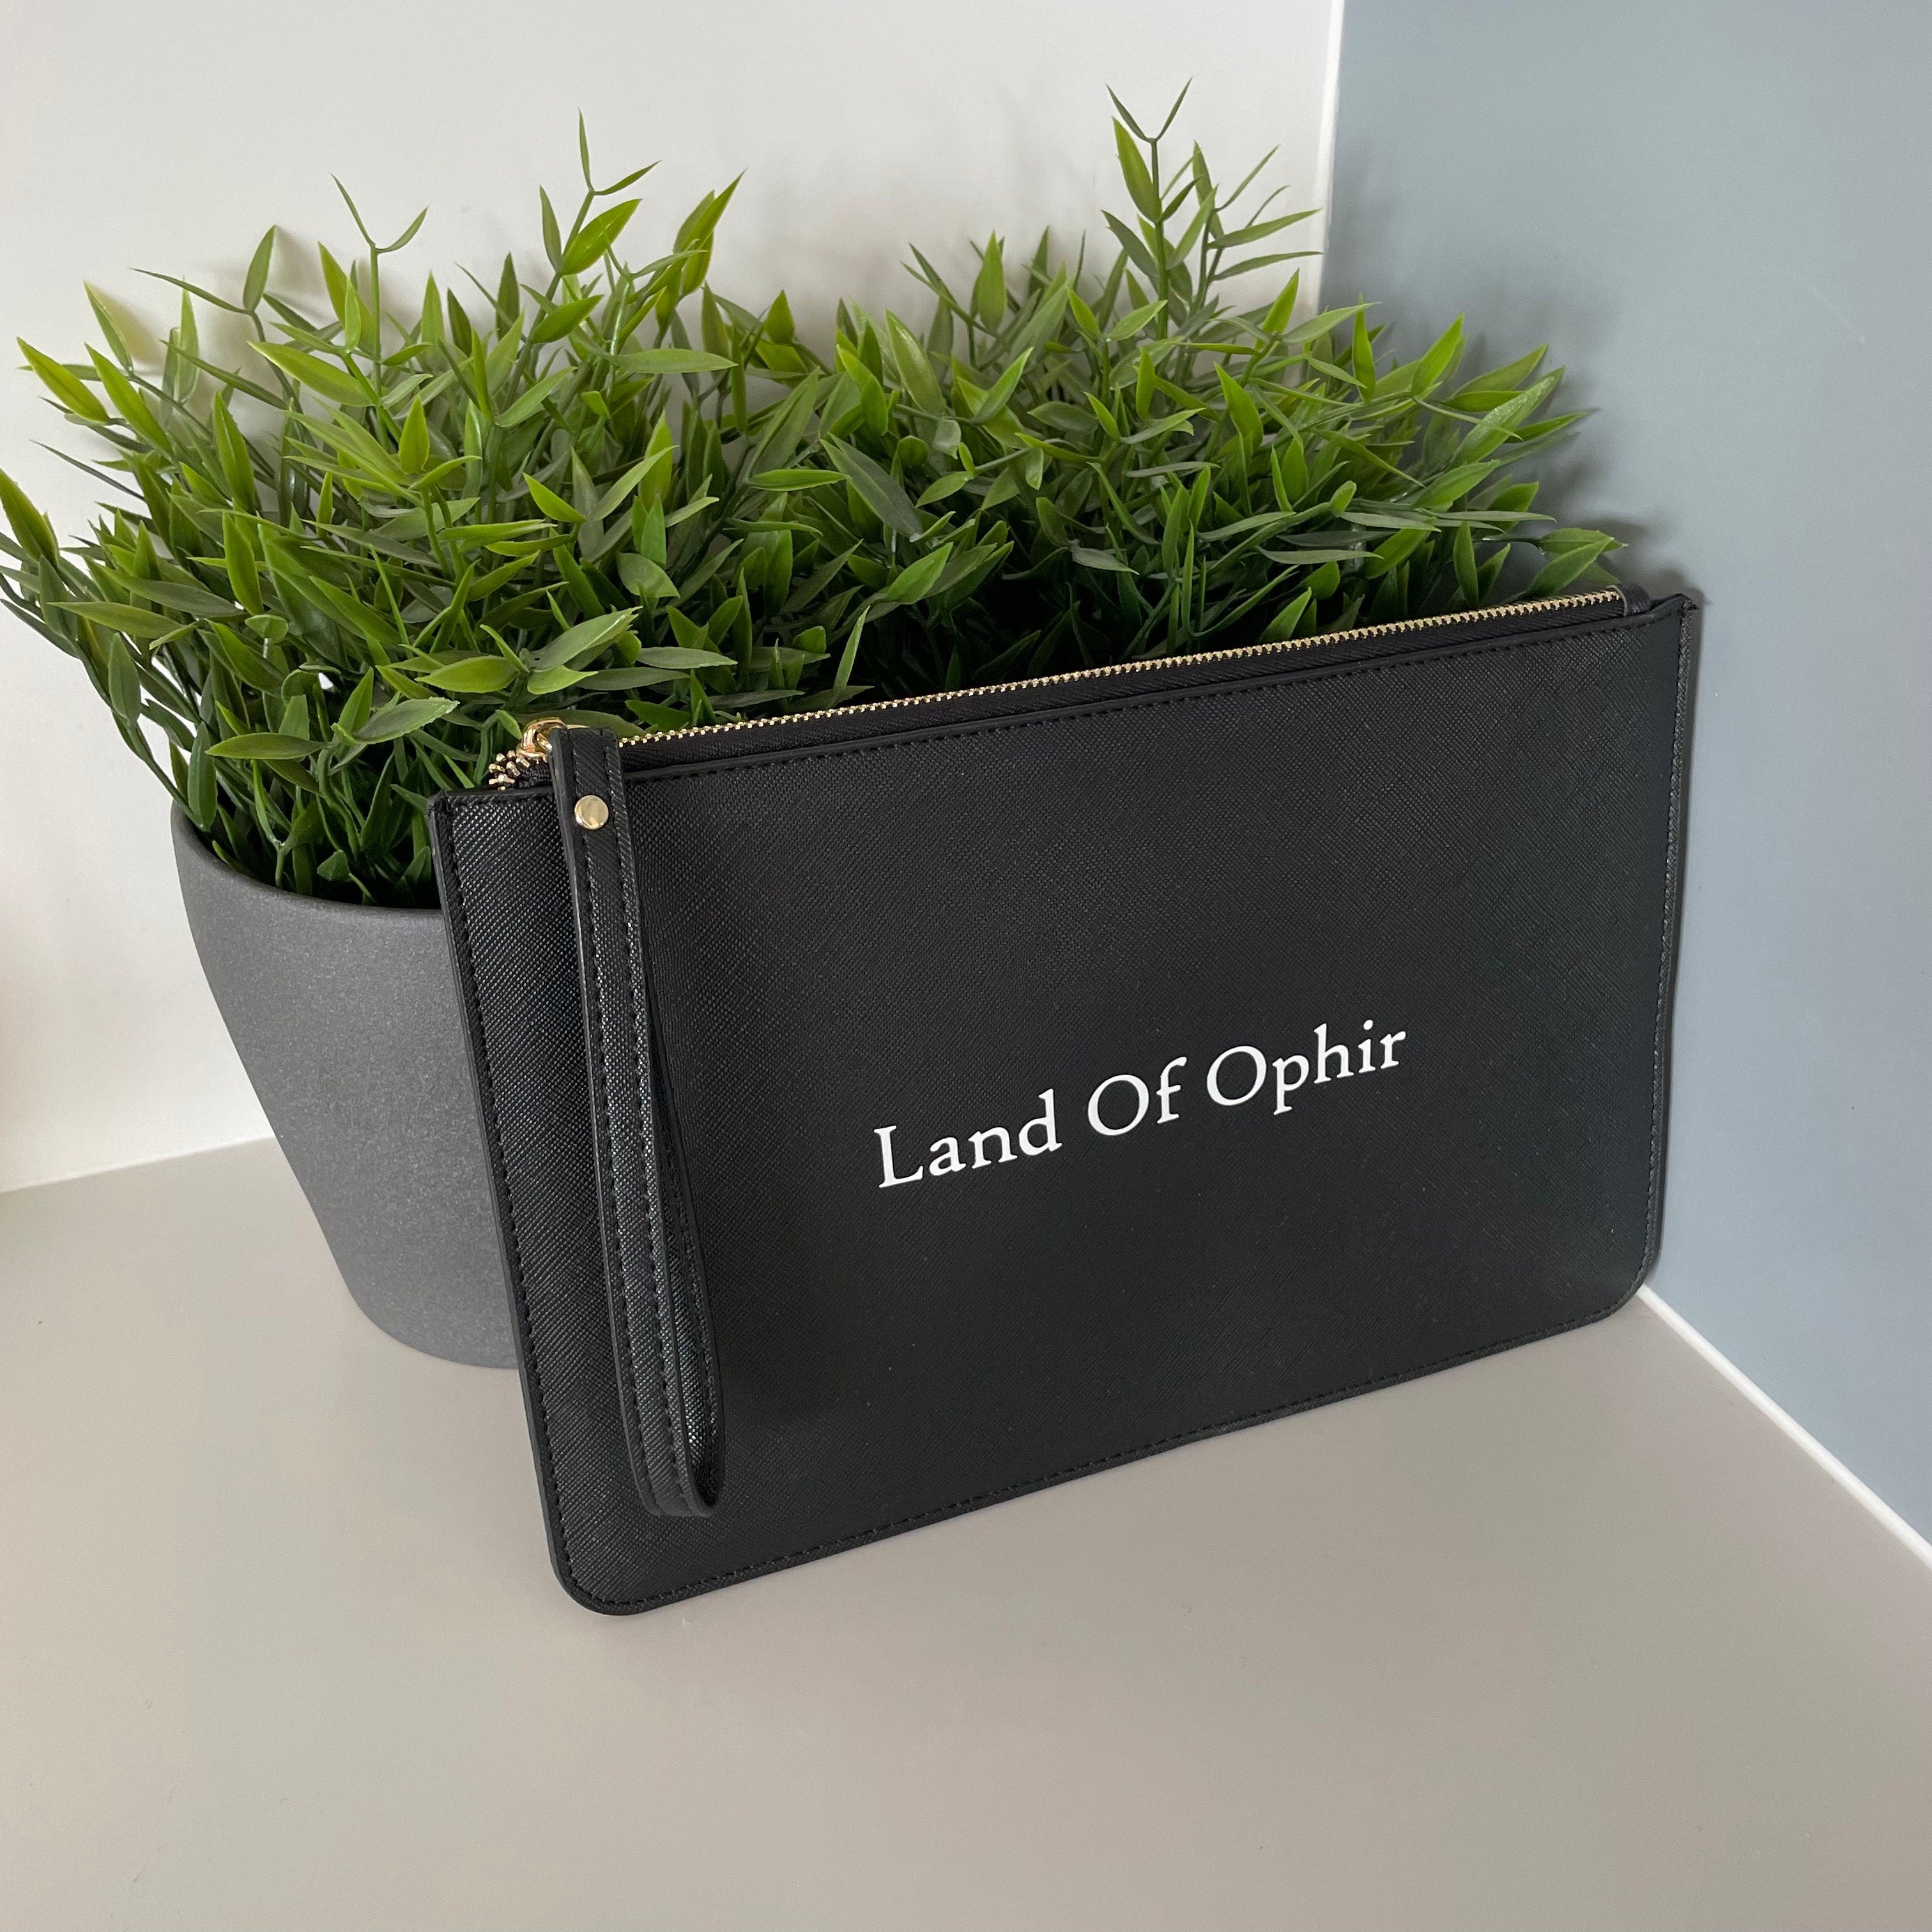 Luxury Land Of Ophir Men's Clutch Bag With Wristlet Strap